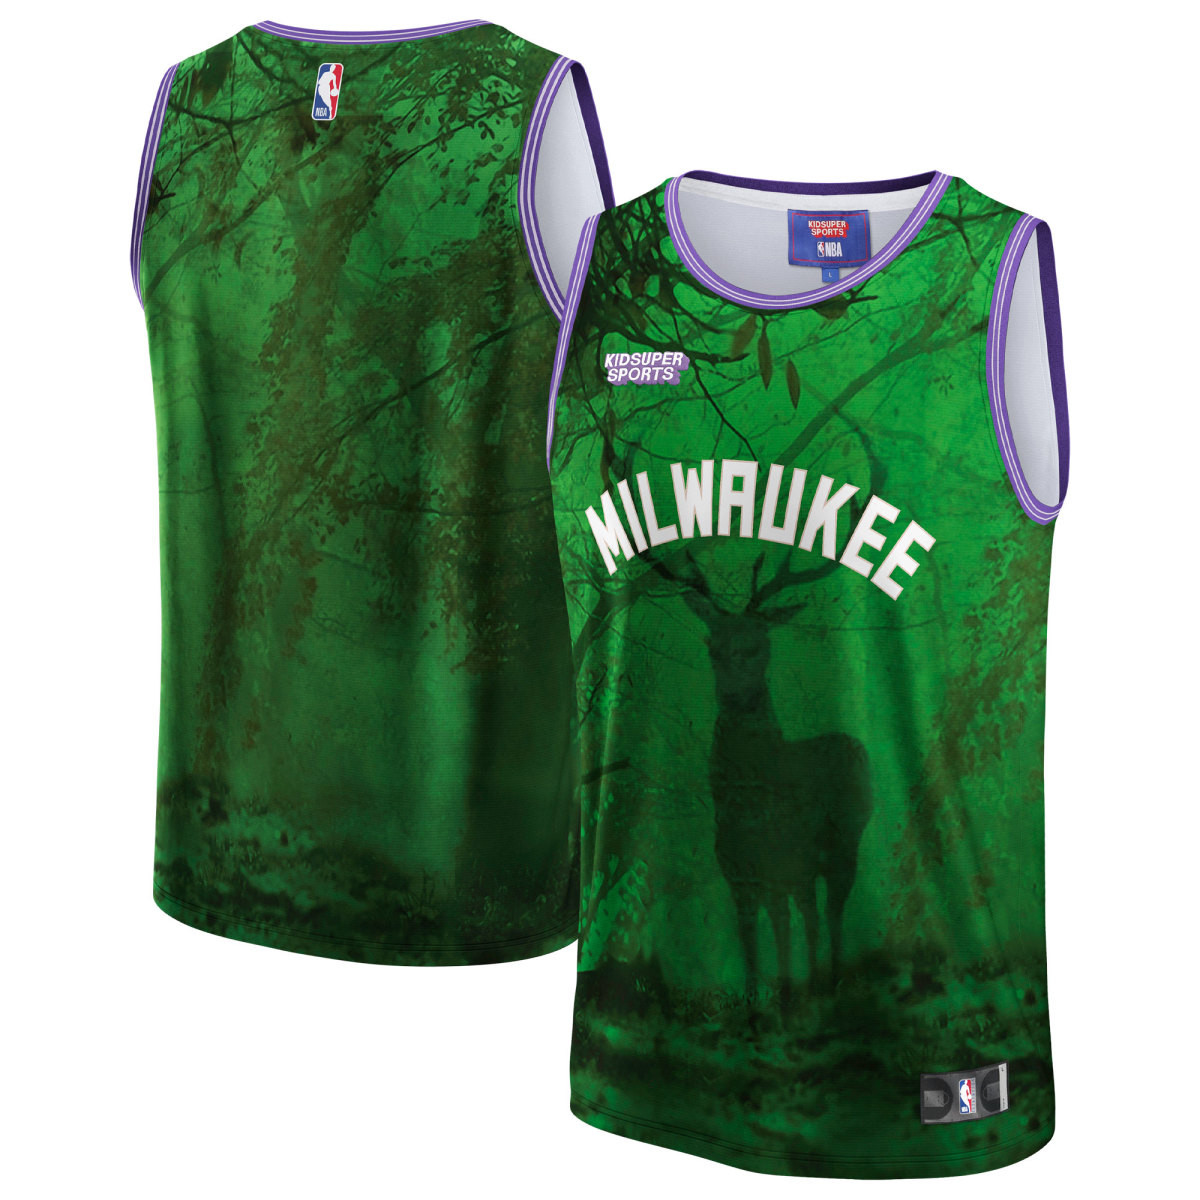 KidSuper's awesome-looking NBA fan gear is now being sold on 